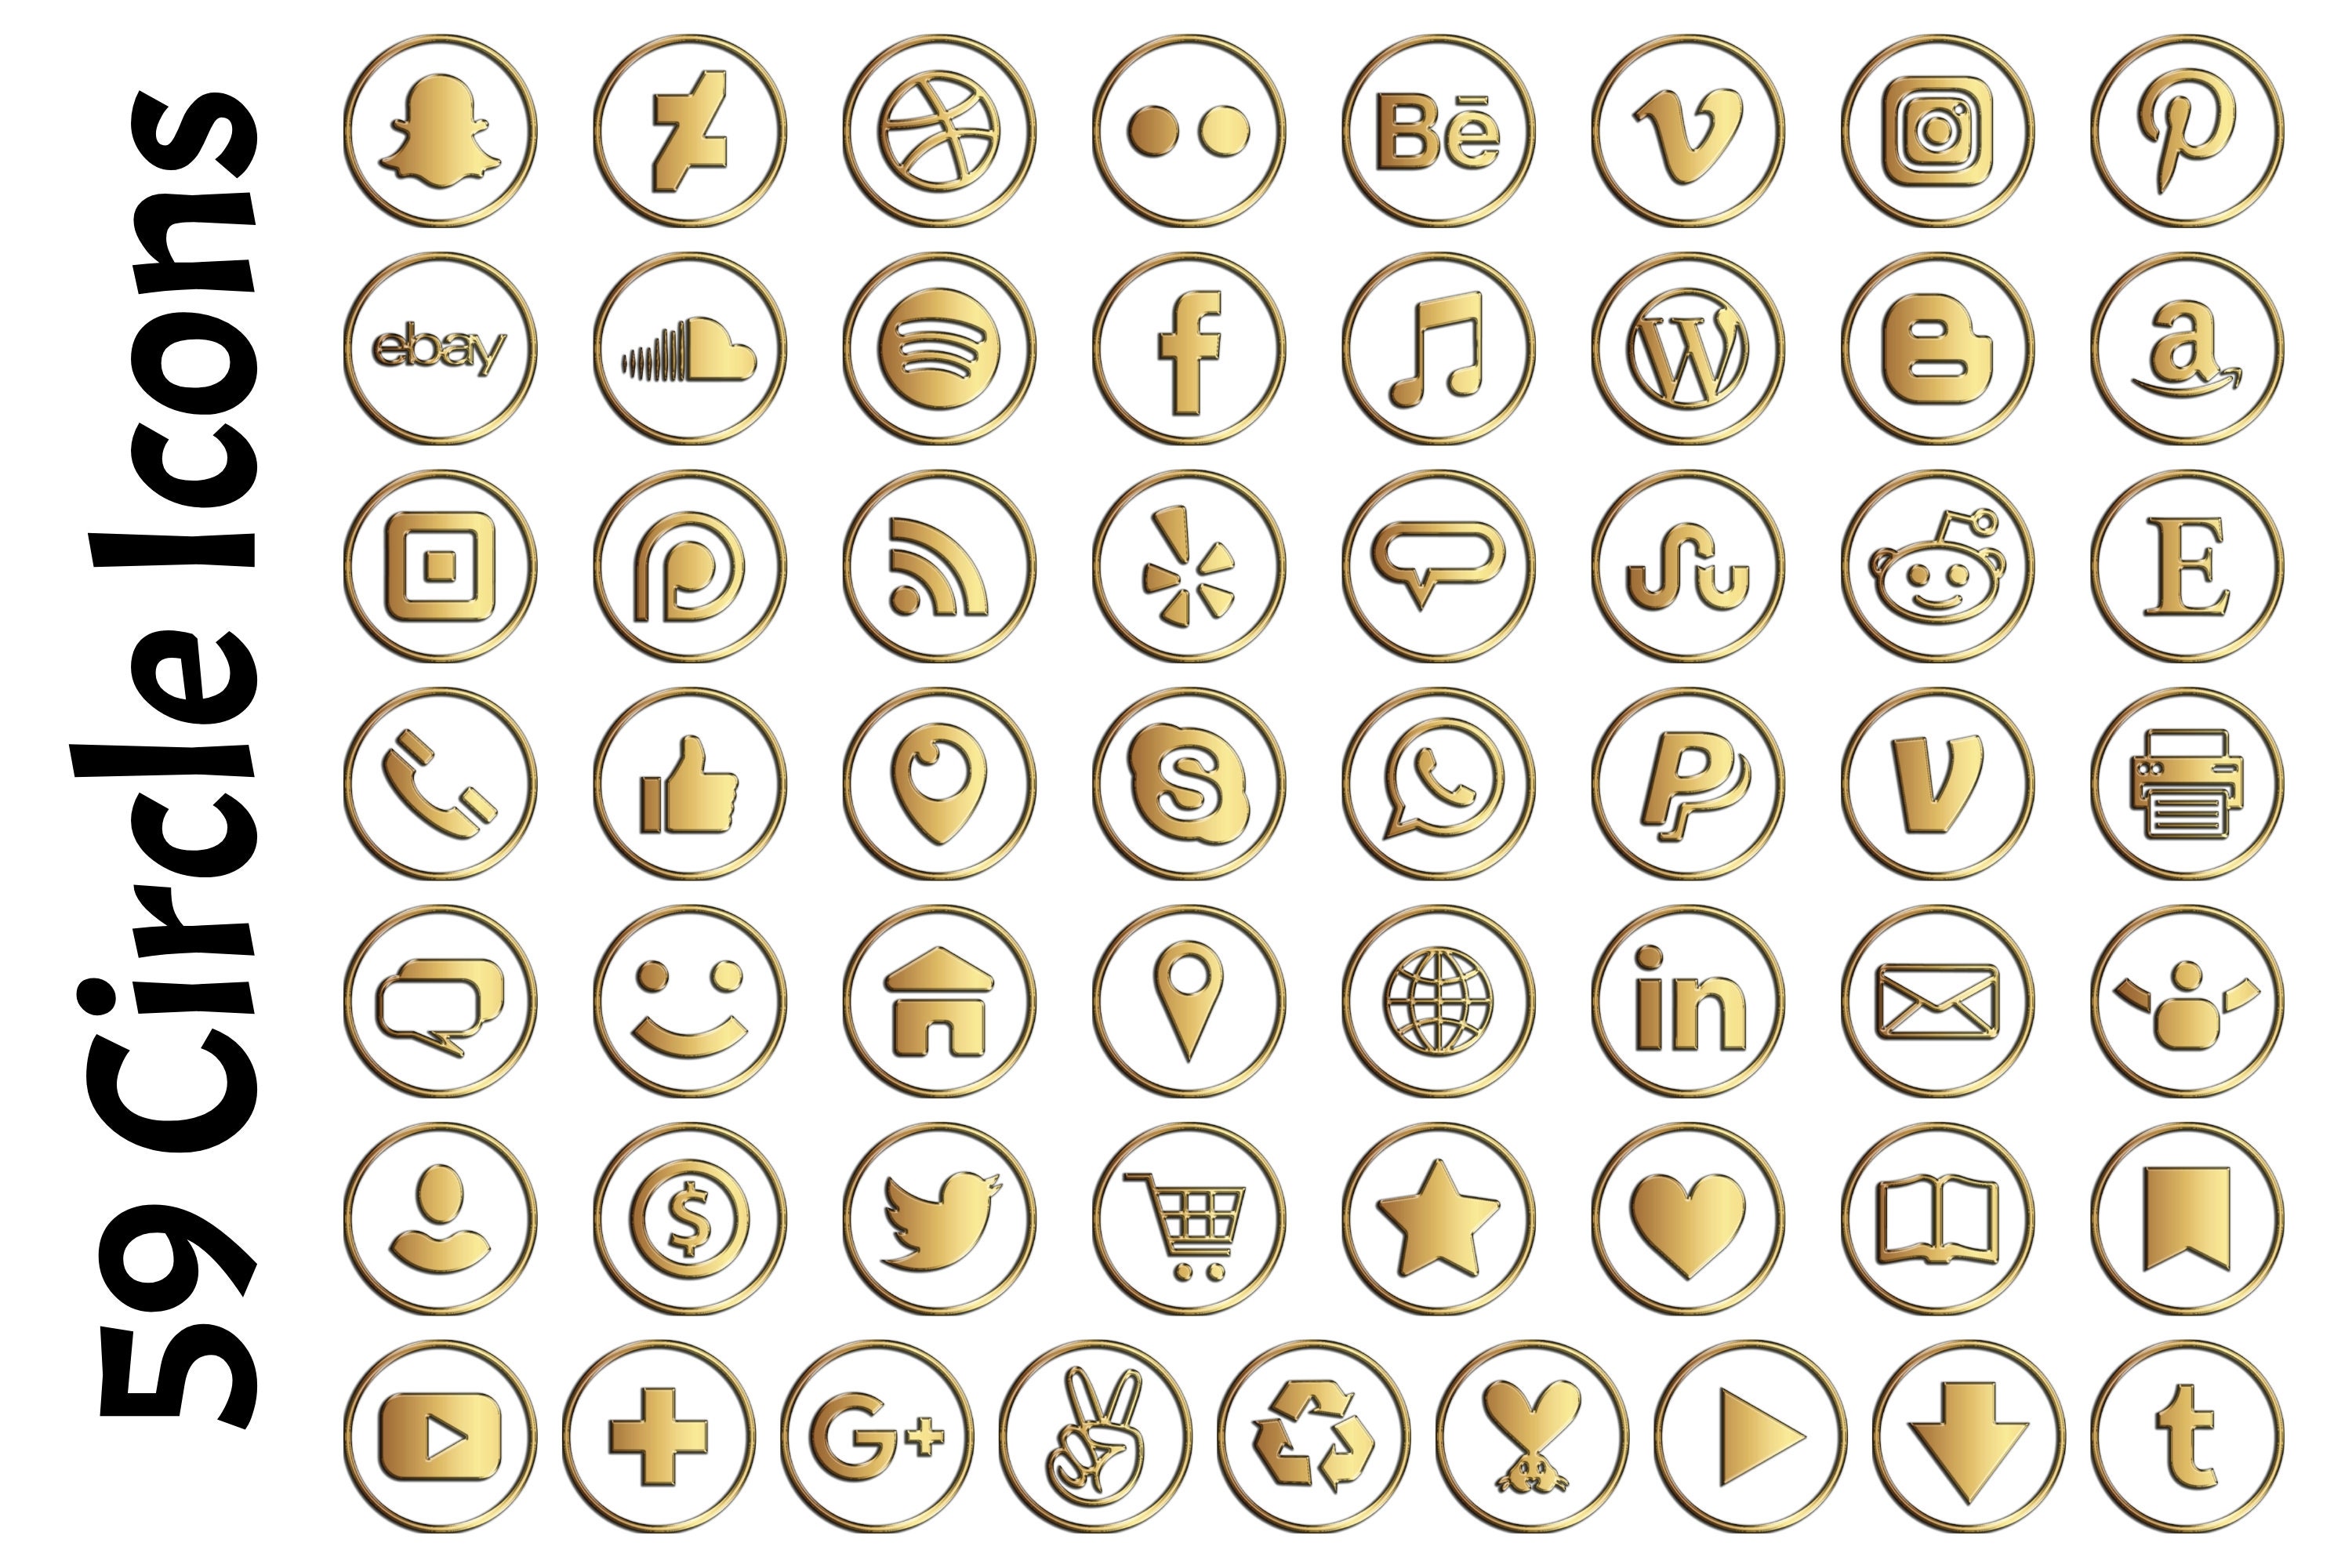 293 Gold Social Media Icons. Perfect for web design diy | Etsy